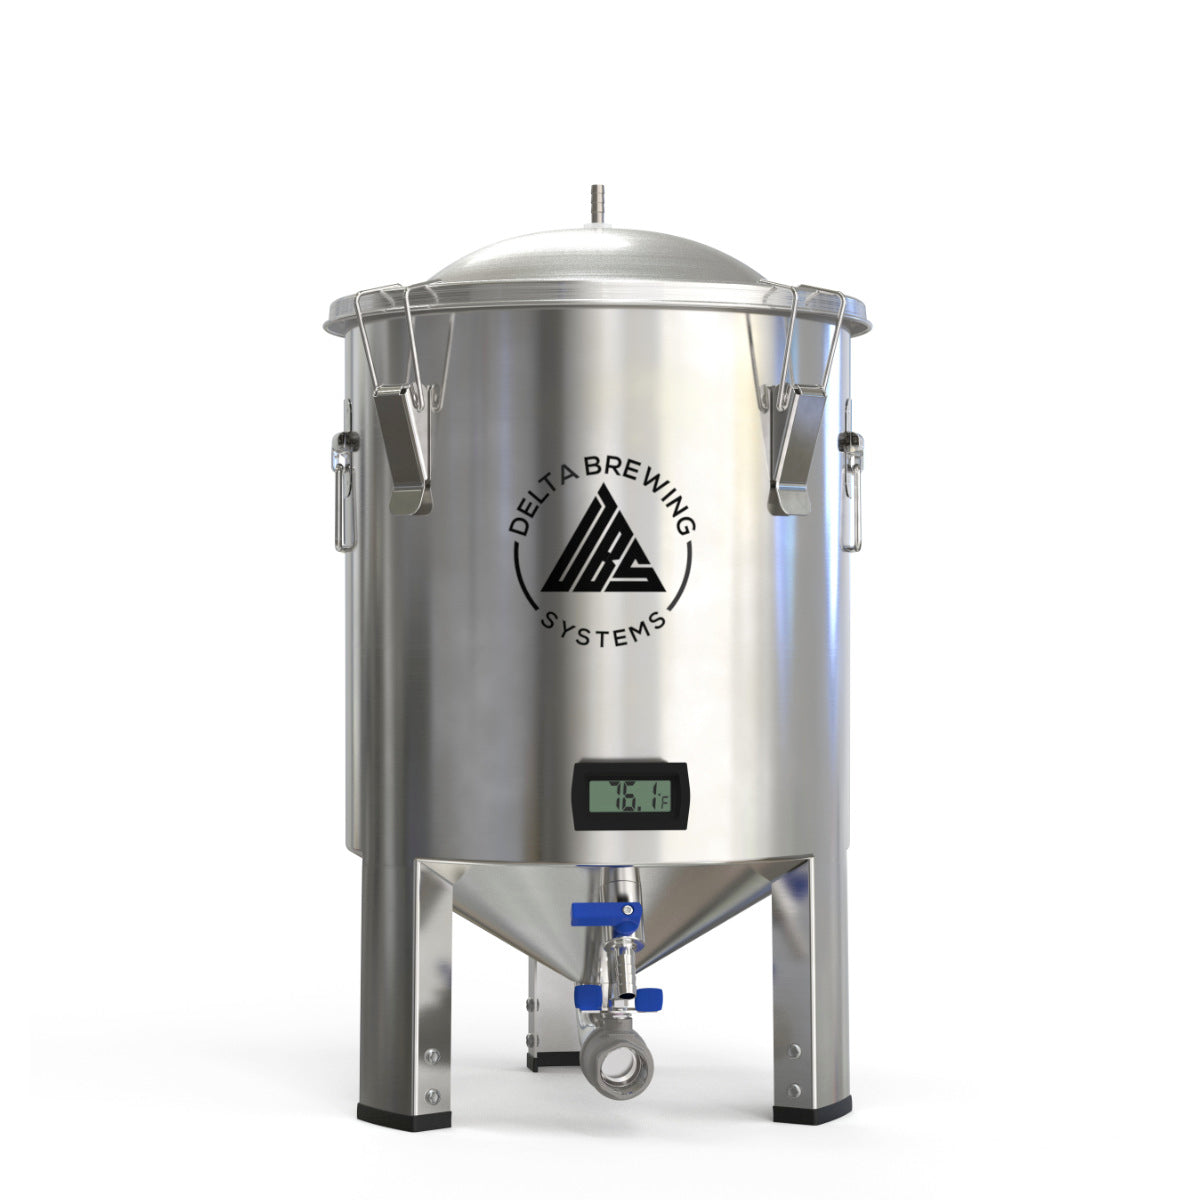 Stainless Steel Fermenters - Home Brewing - Delta Brewing Systems